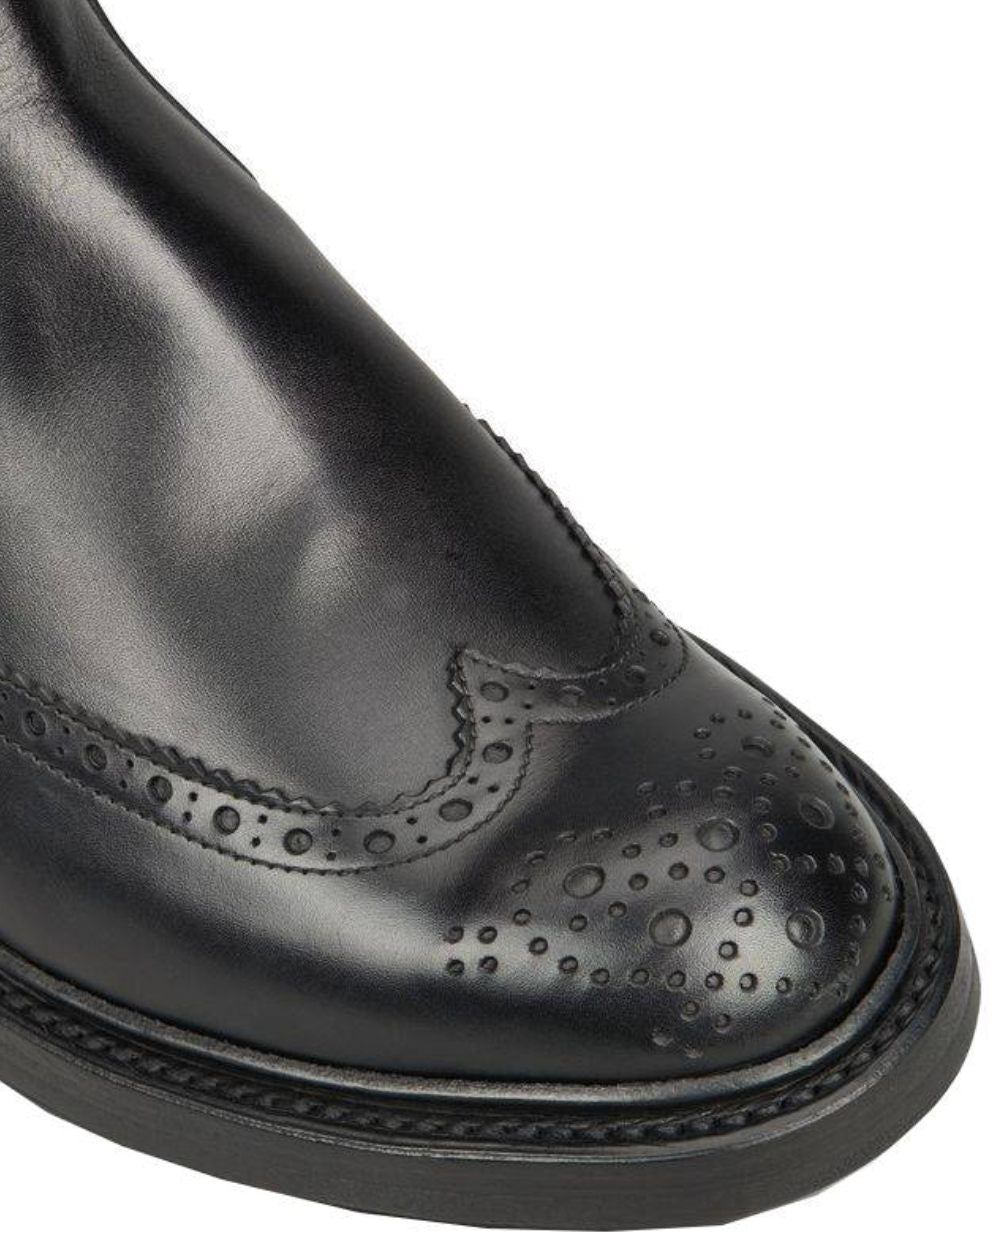 Black Coloured Trickers Henry Commando Sole Country Dealer Boot On A White Background 